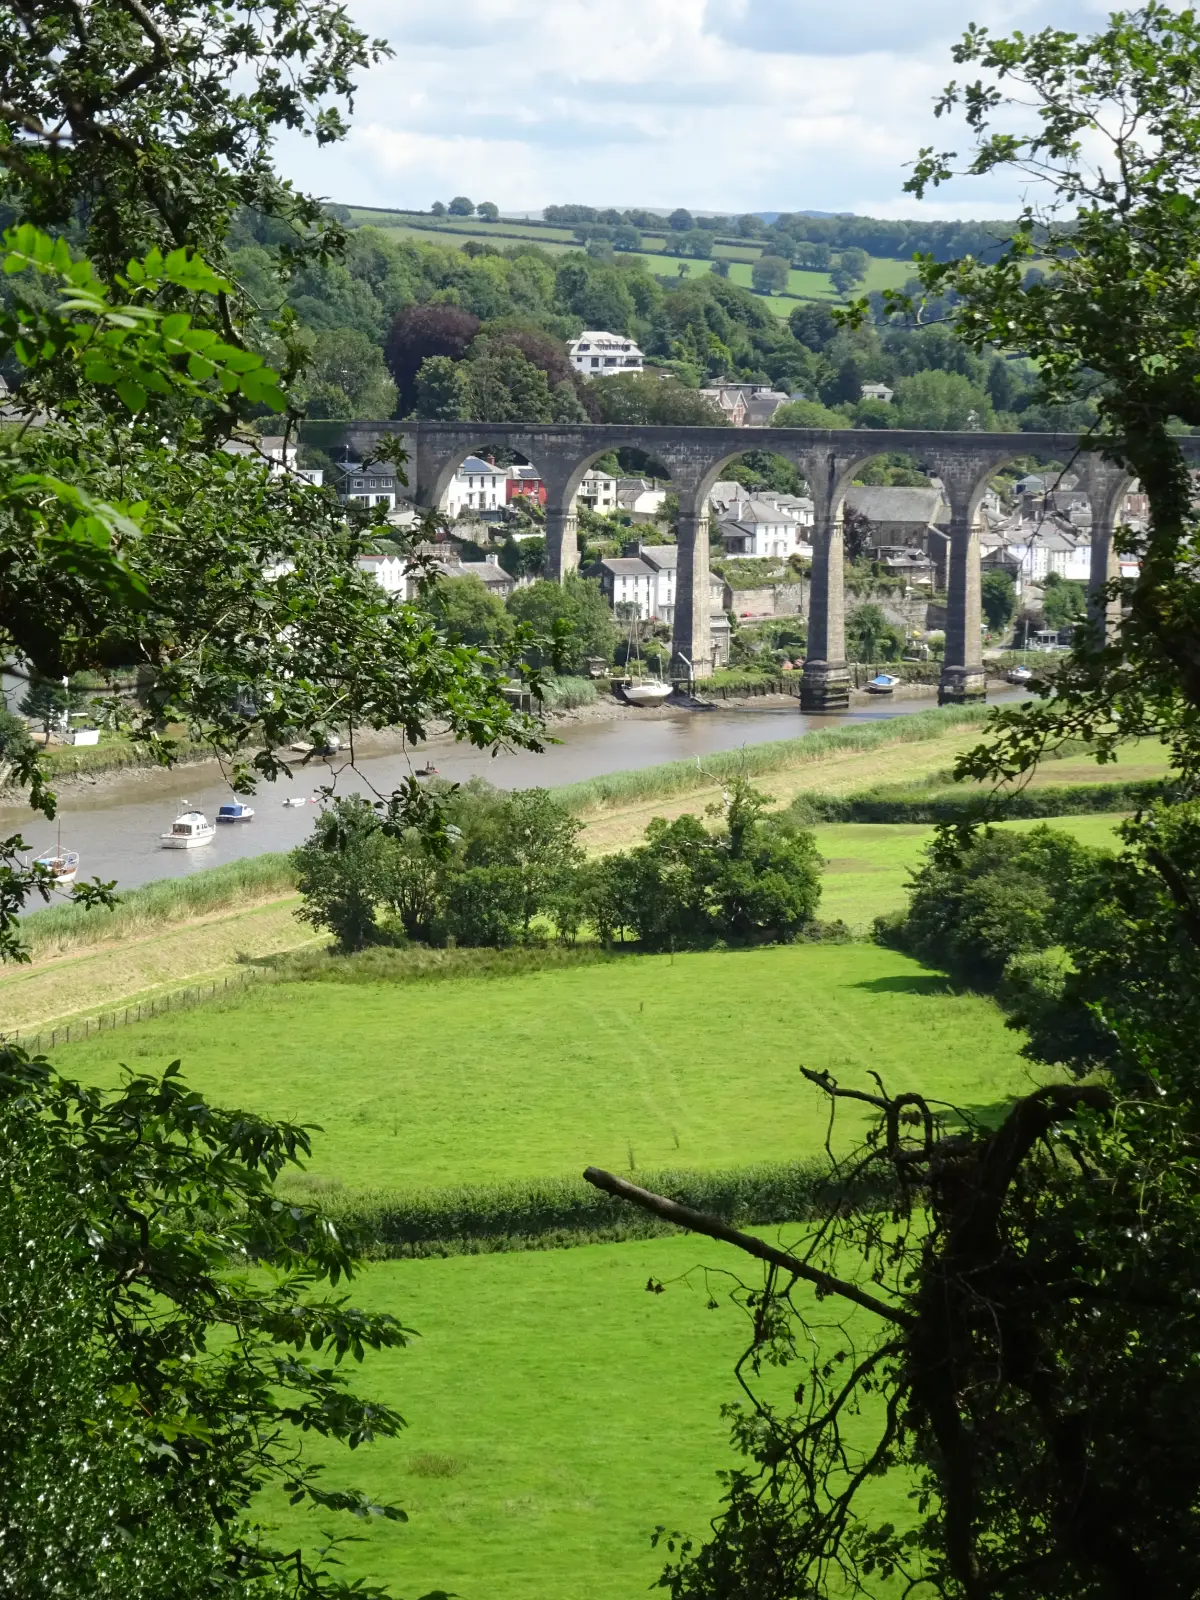 The River Tamar & Cotehele Quay from Calstock Station